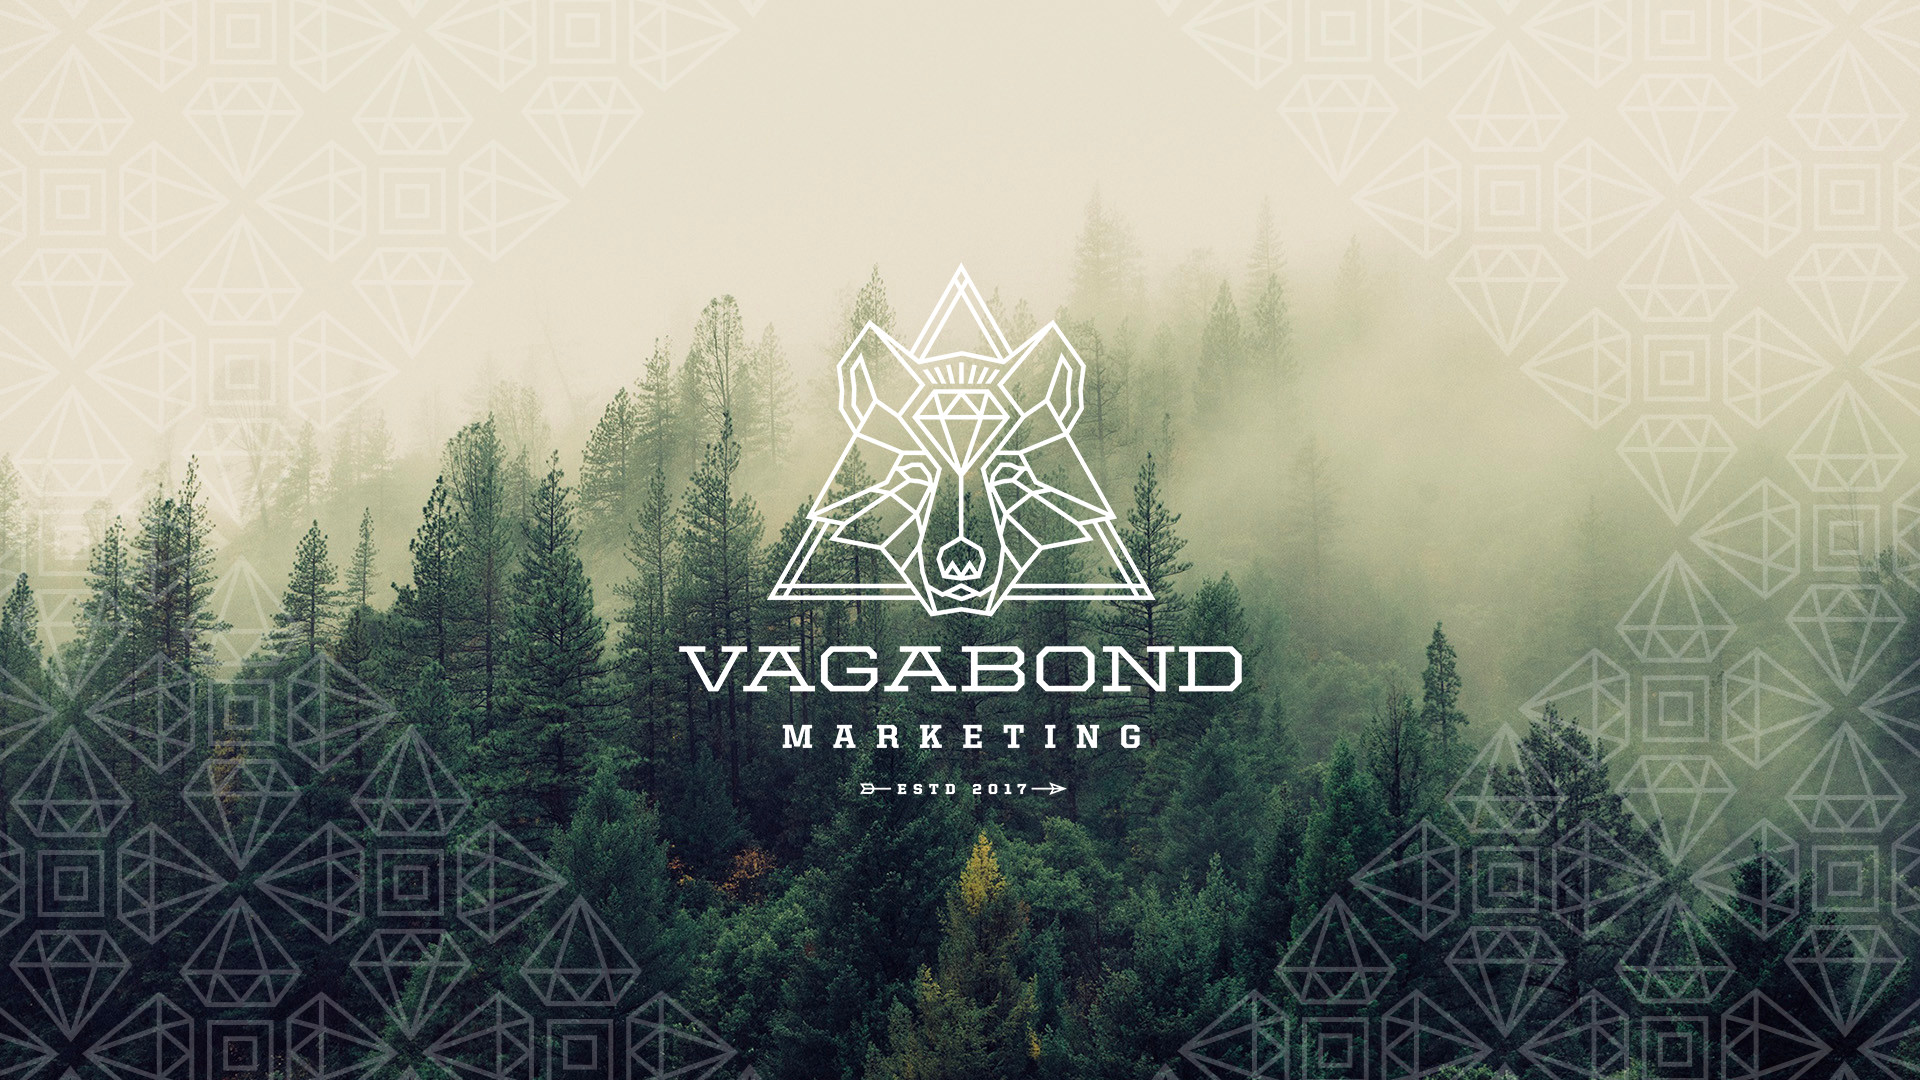 WERE VAGABOND MARKETING. WELCOME TO OUR TRIBE